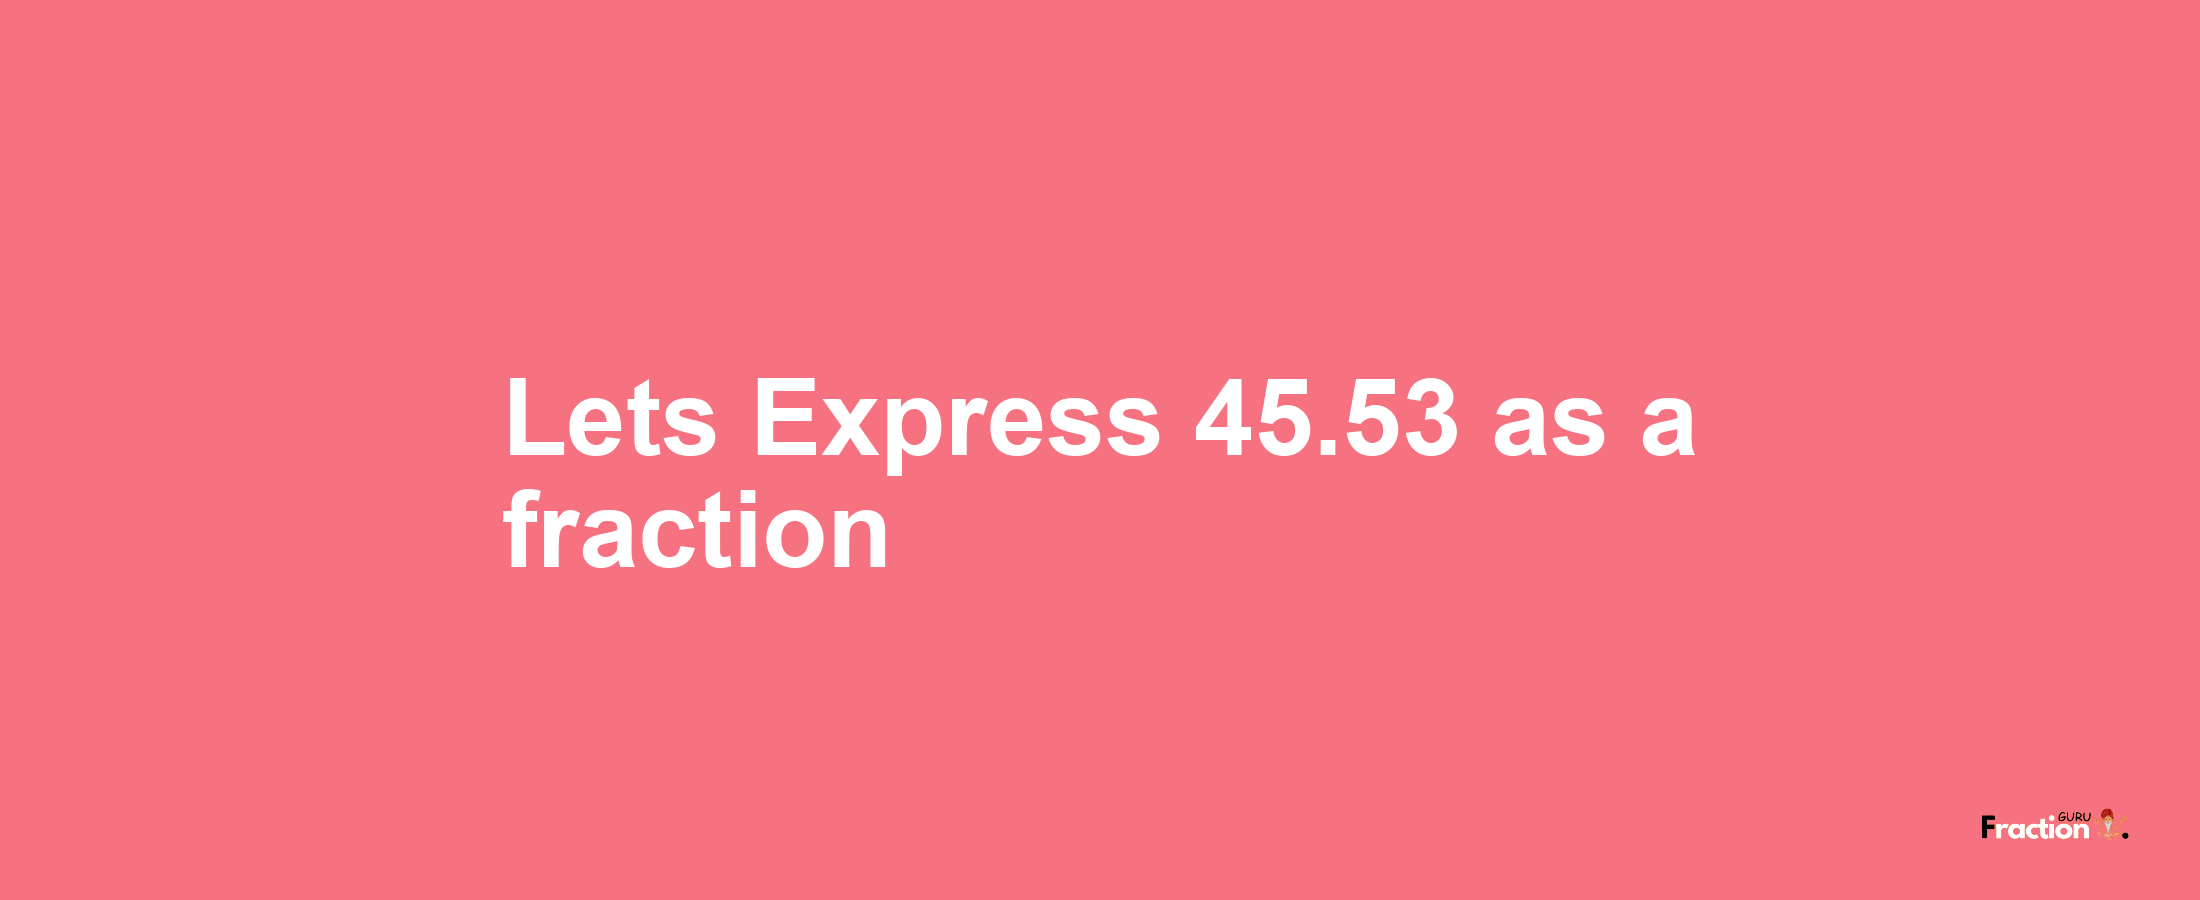 Lets Express 45.53 as afraction